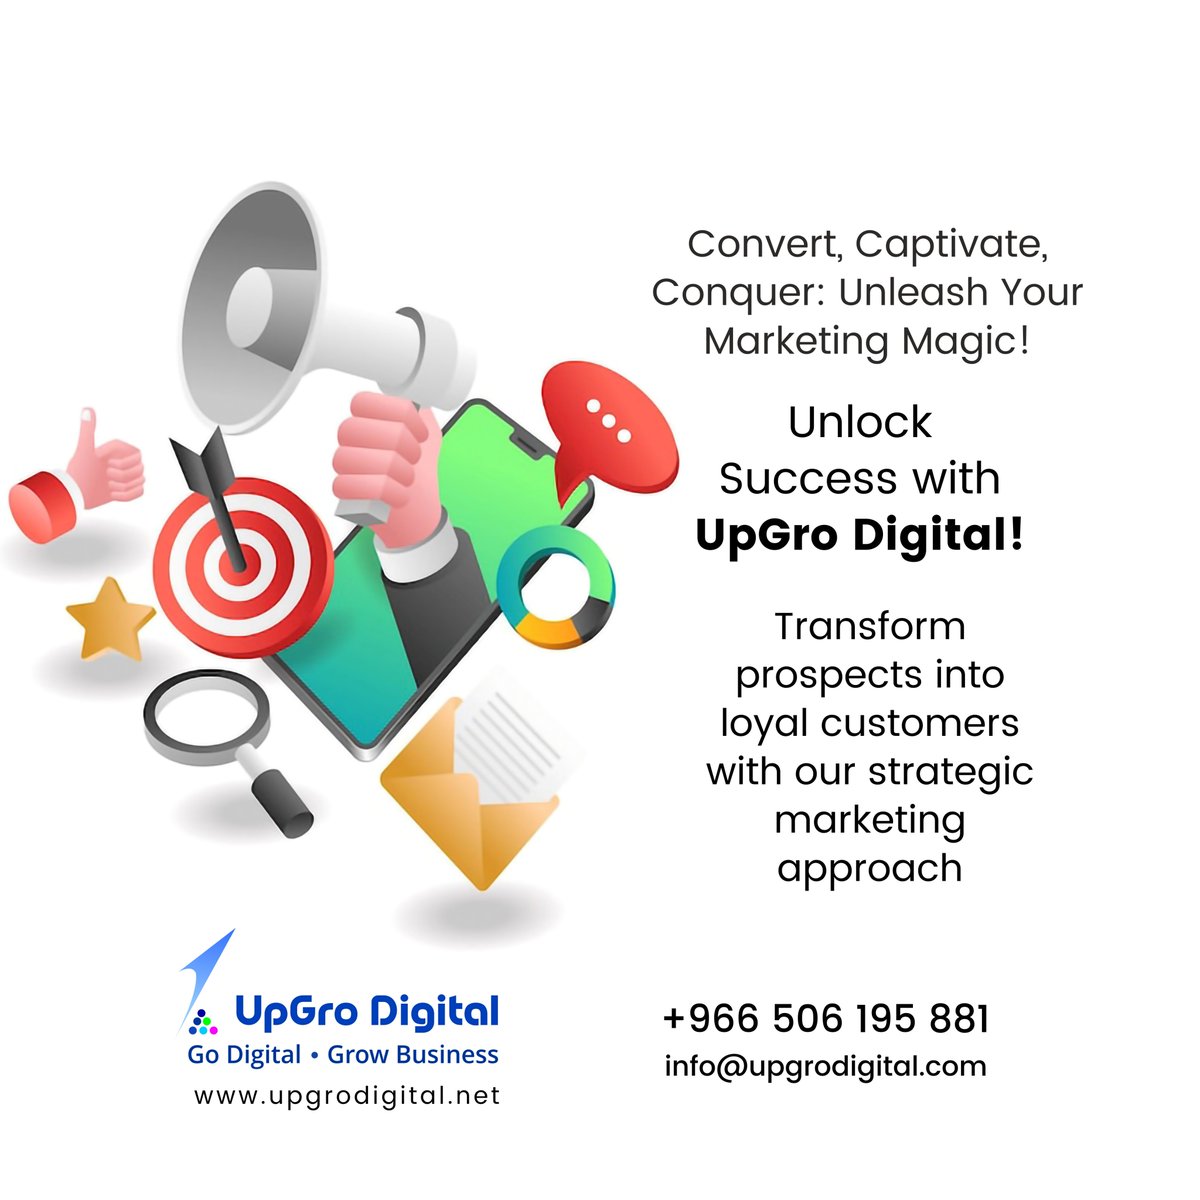 Let us unleash the power of effective marketing to elevate your brand and expand your business’s reach!

Contact Us today:

🌐 upgrodigital.net
📧 info@upgrodigital.com
📞 +966 50 619 5881

#upgrodigital #advancedseo #digitalmarketing #marketing #saudiarabia